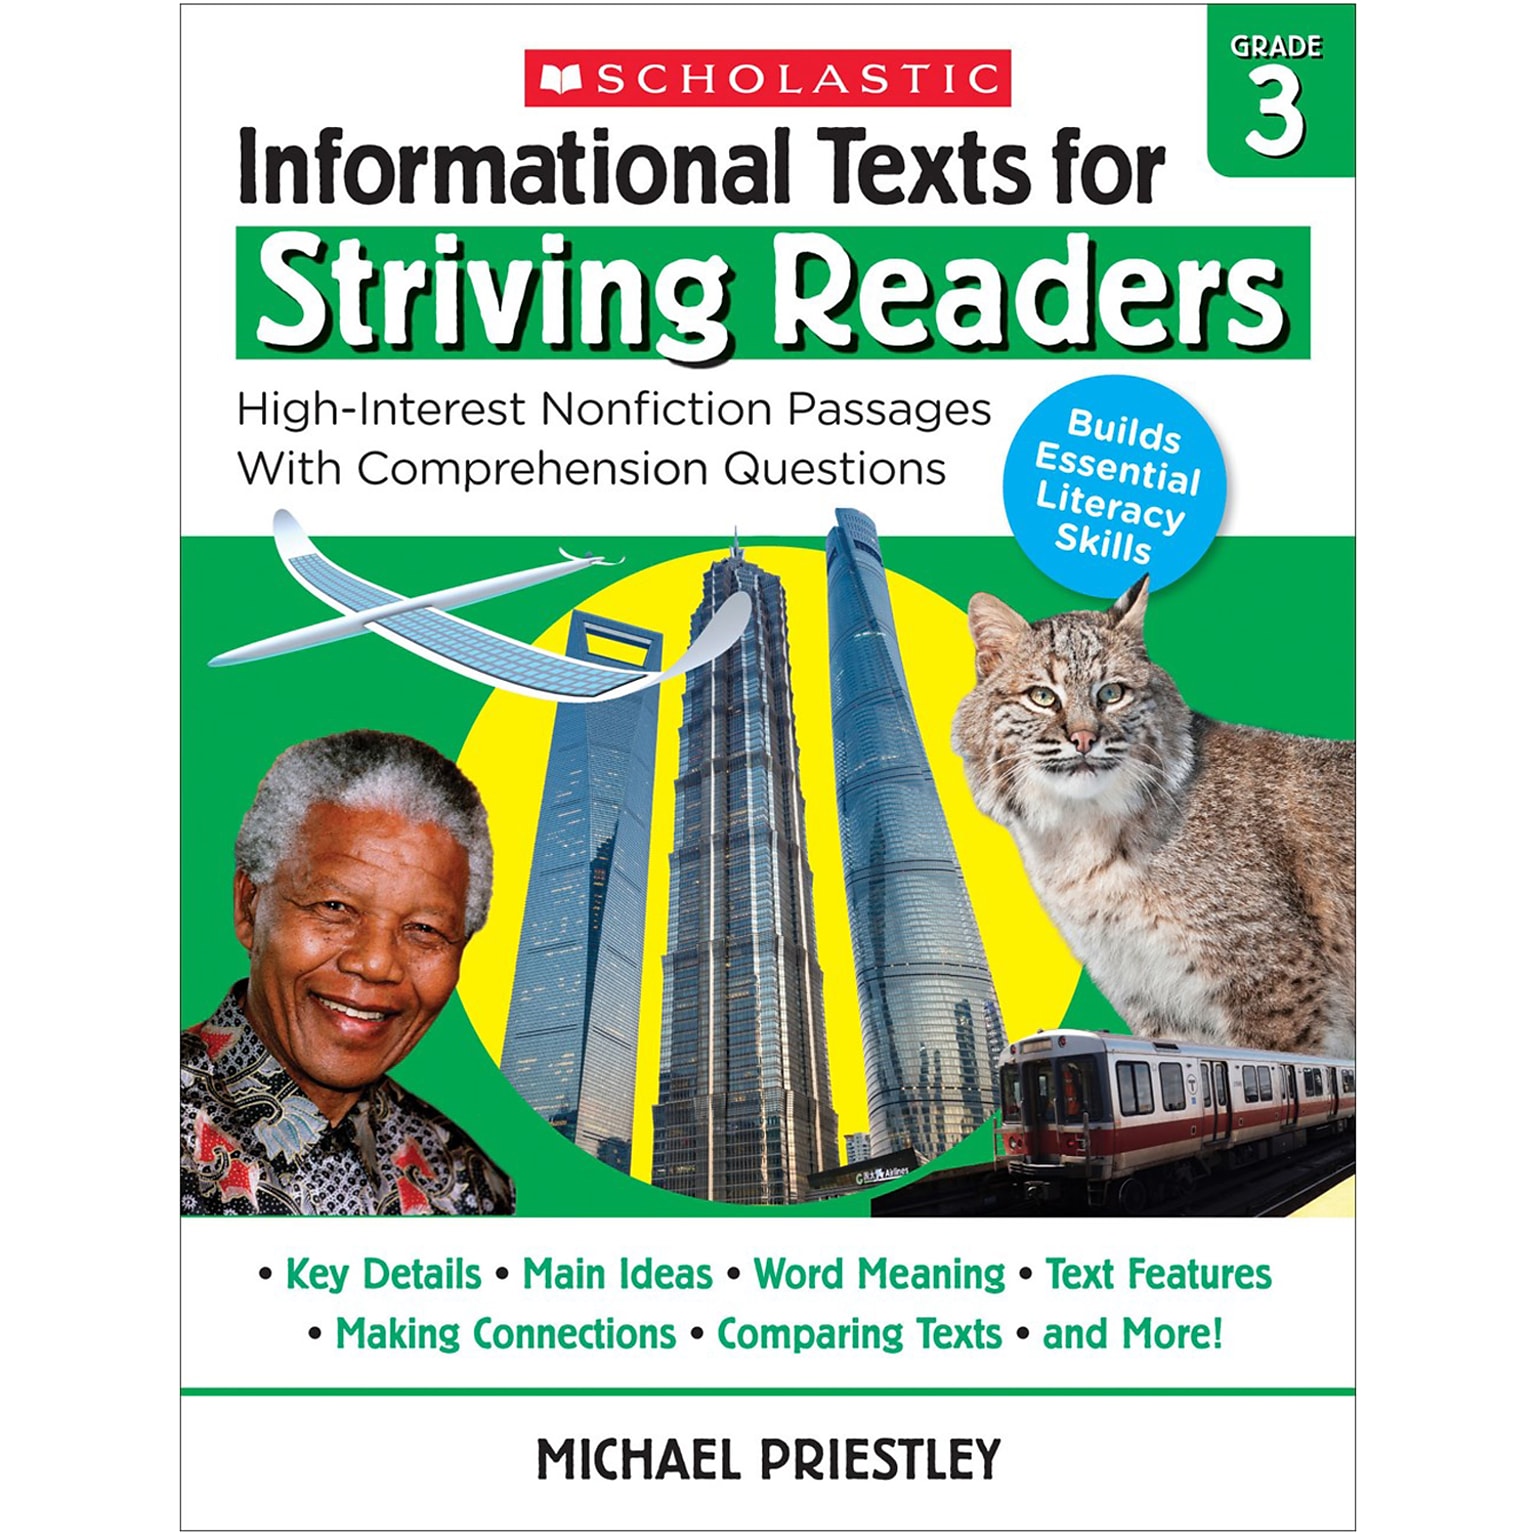 Scholastic Teacher Resources Informational Texts for Striving Readers, Green, Grade 3 (SC-708297)